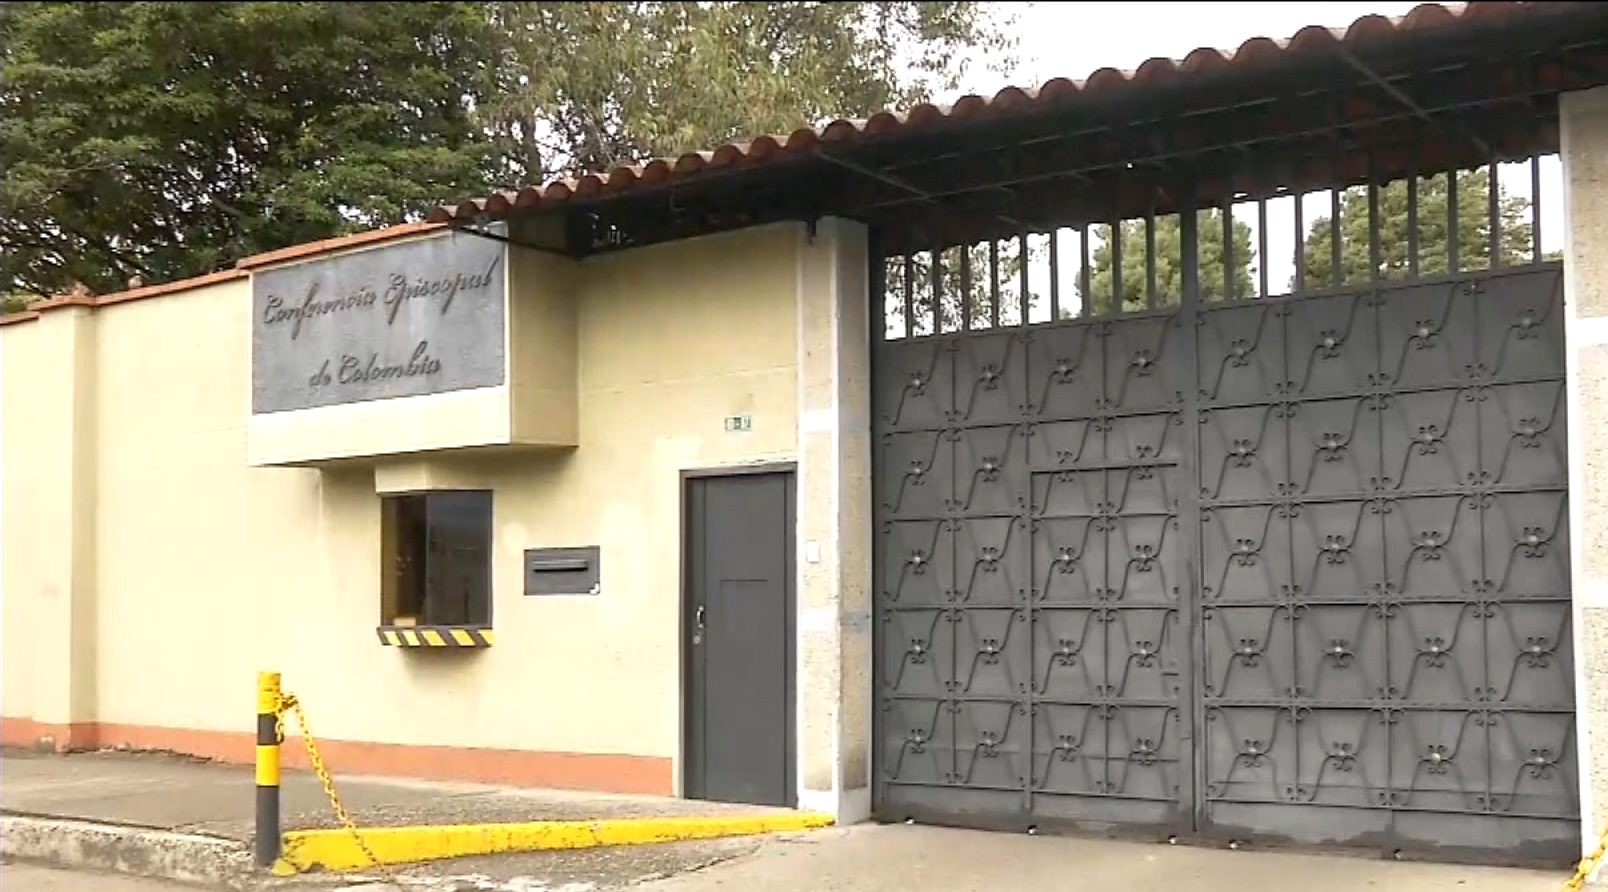 Colombia: criminals dressed as police rob the episcopal headquarters